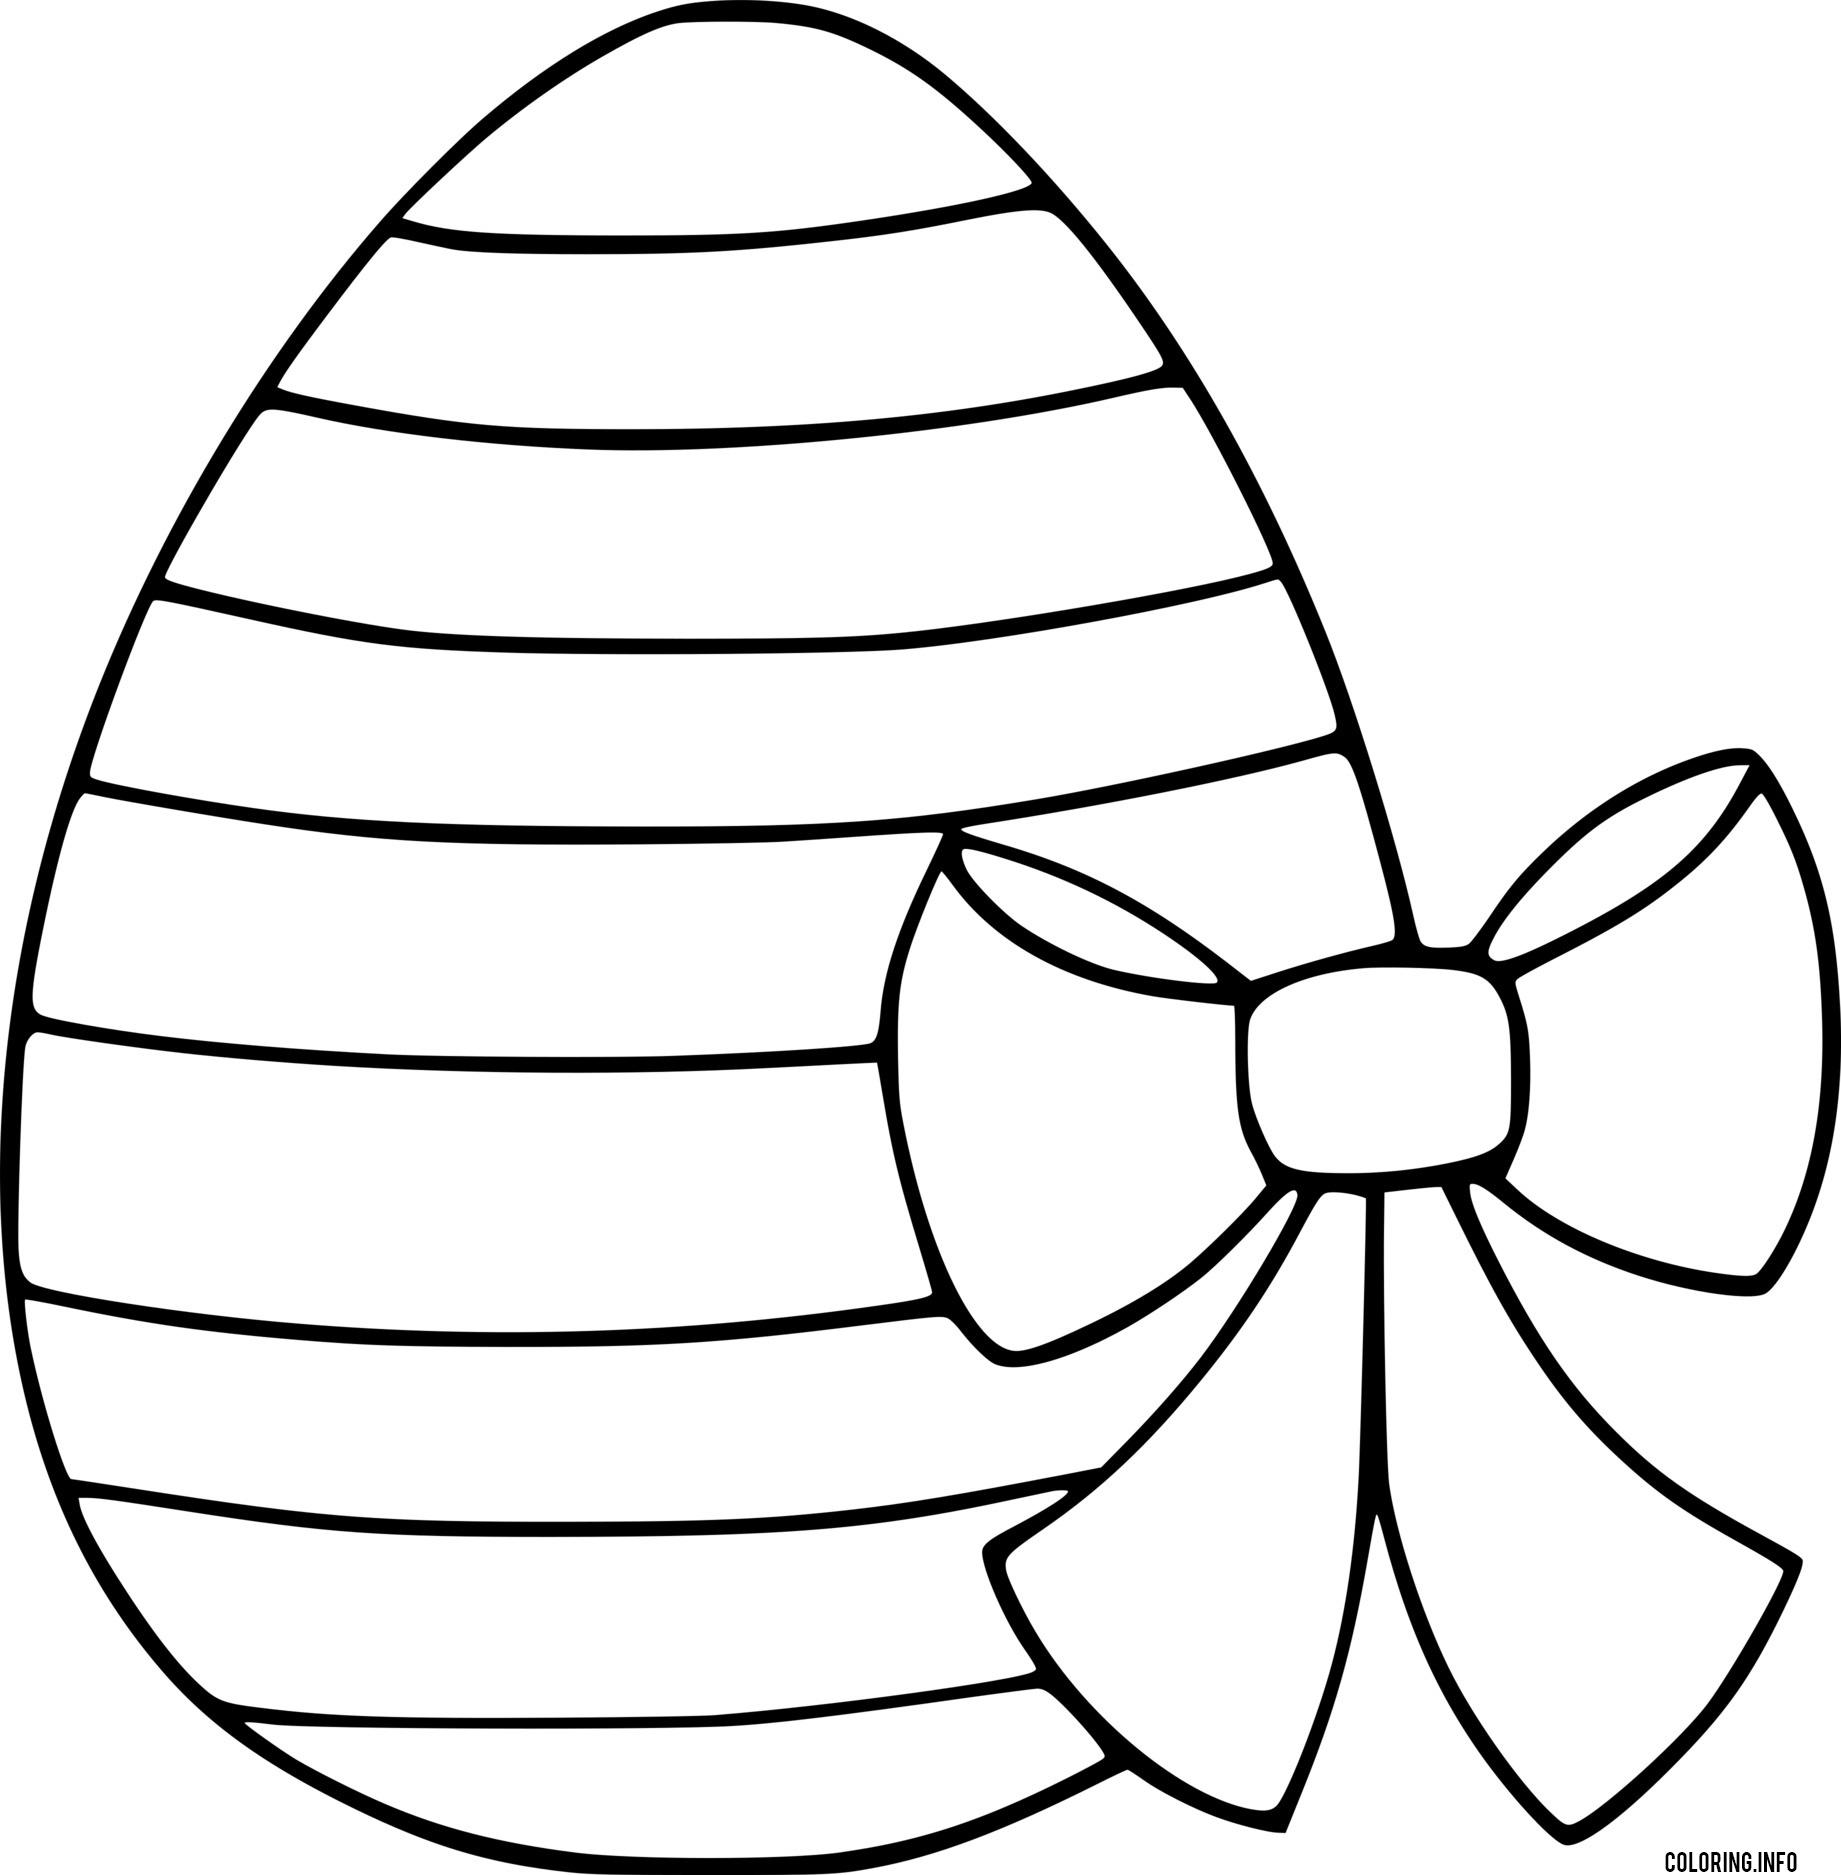 Easy Easter Egg With A Bowknot coloring